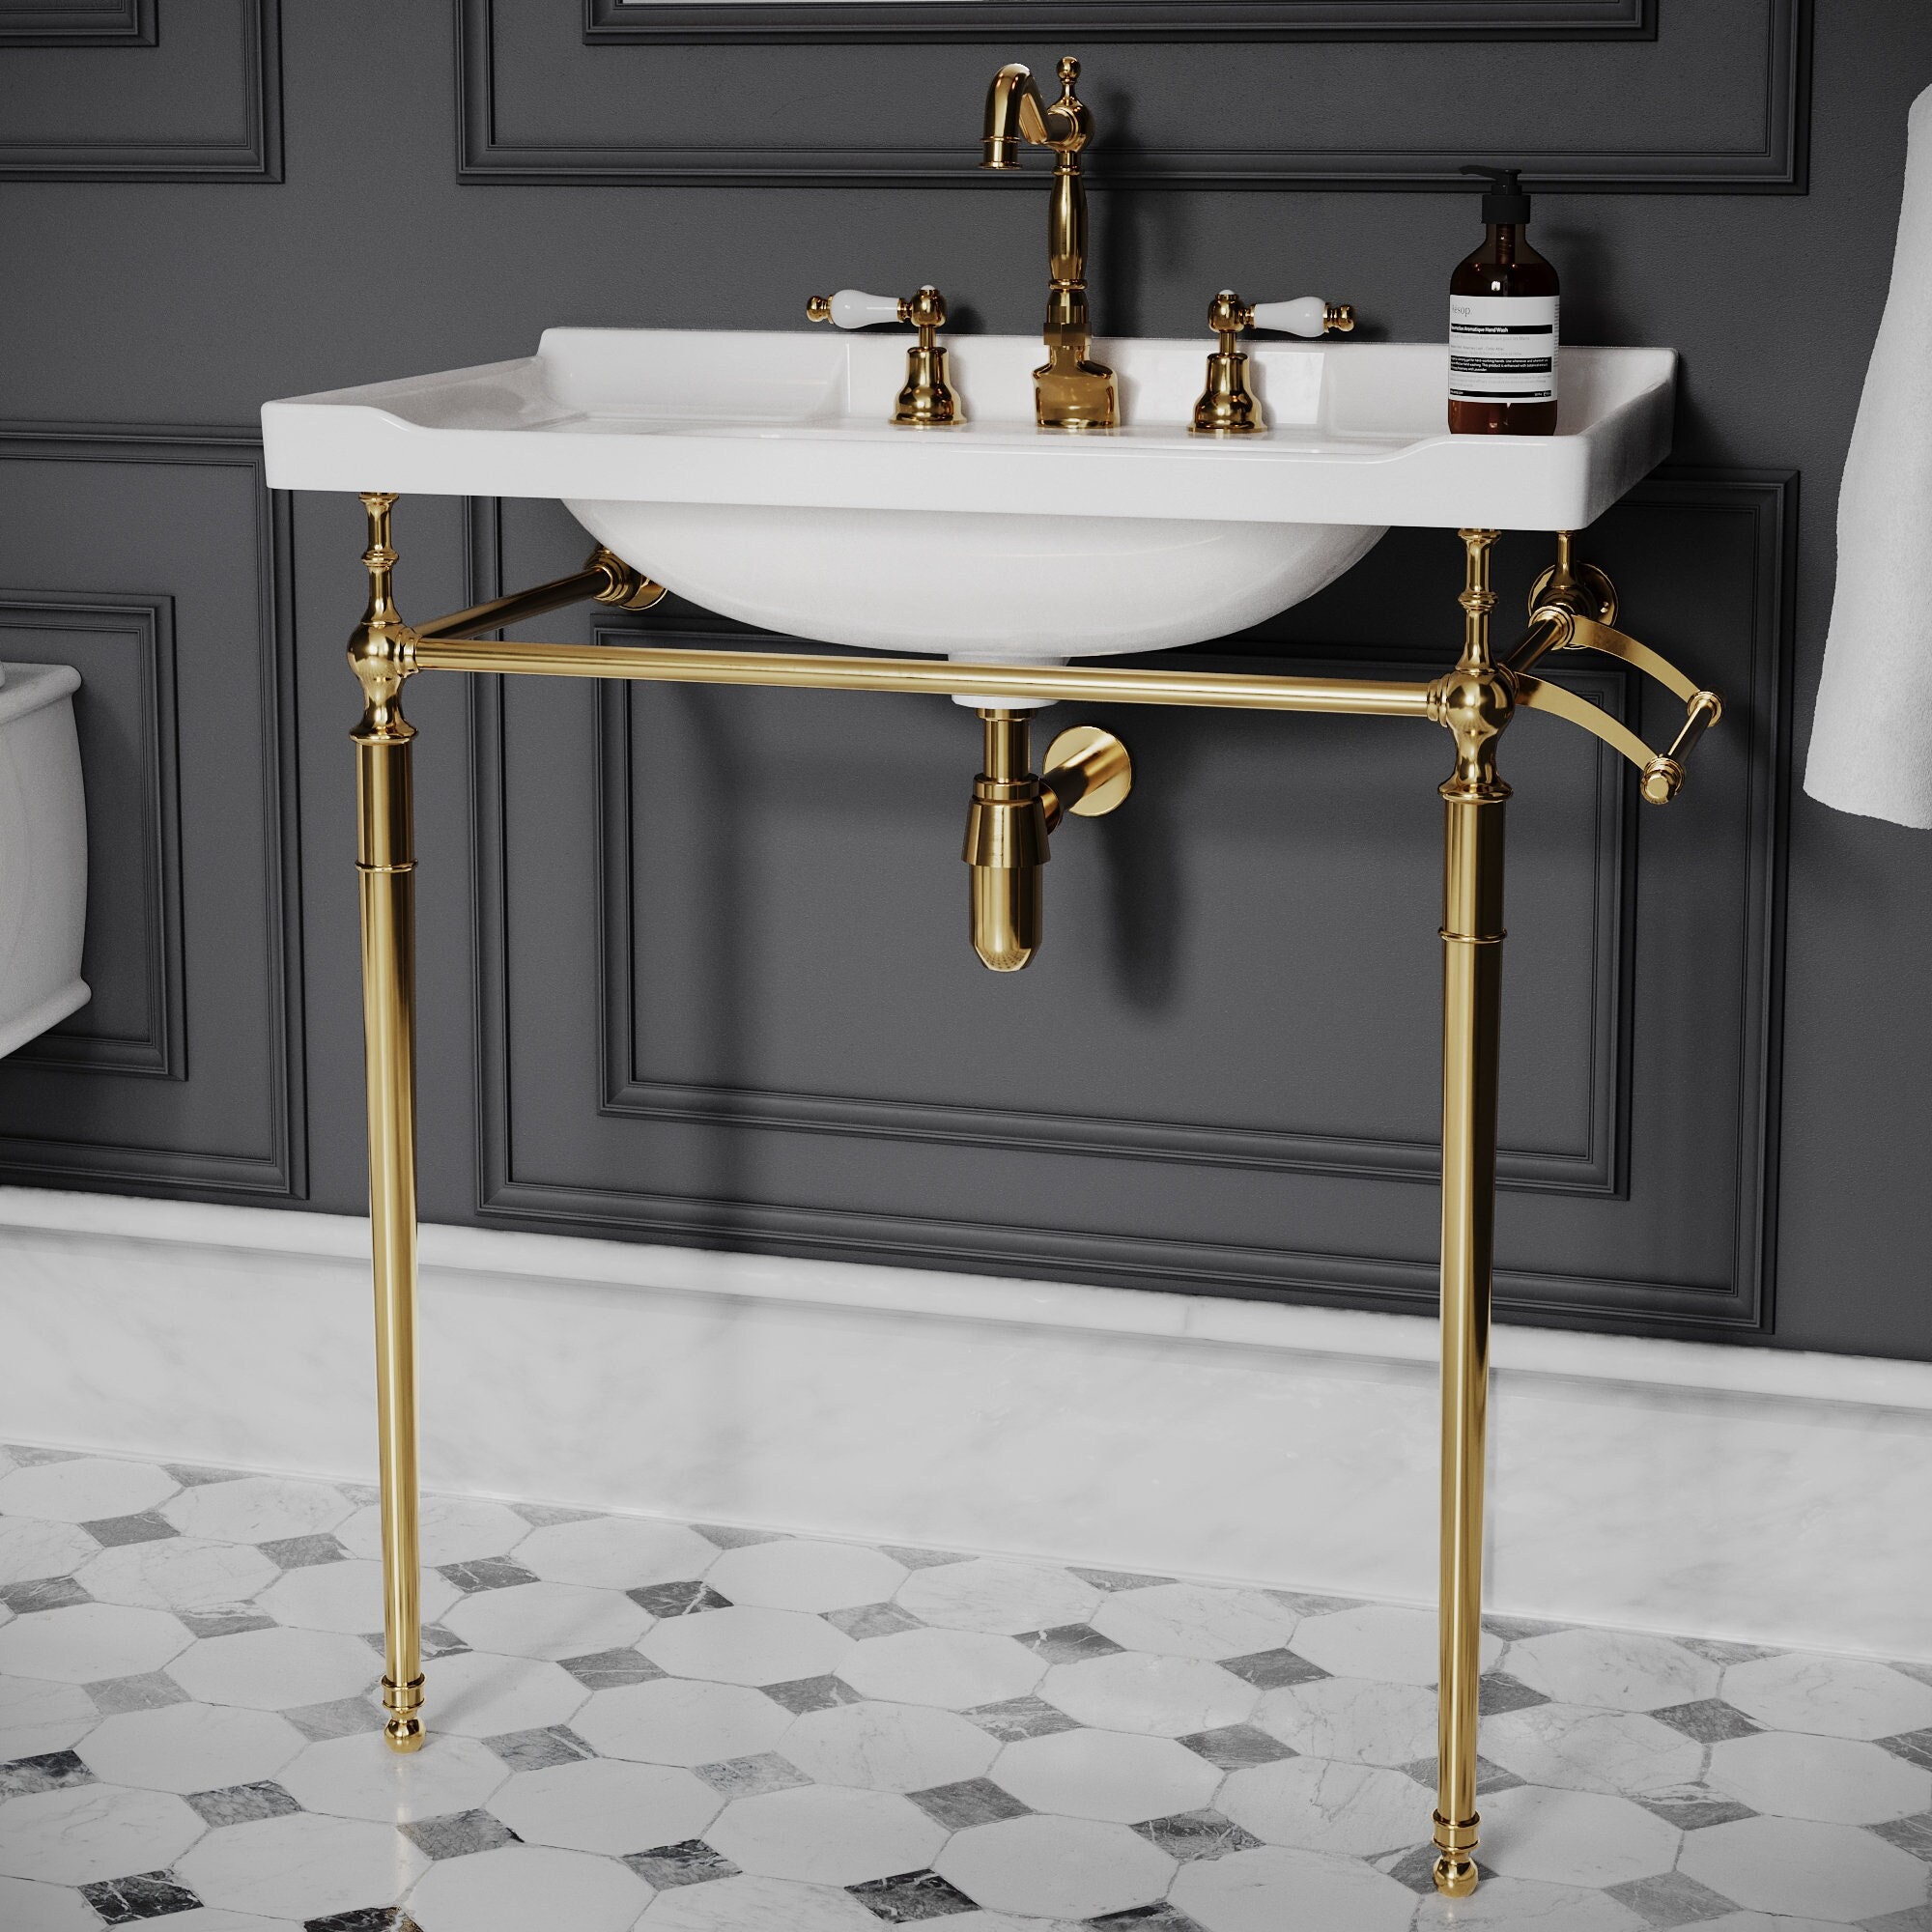 Luxury Bathroom Console Tables & Console Sinks